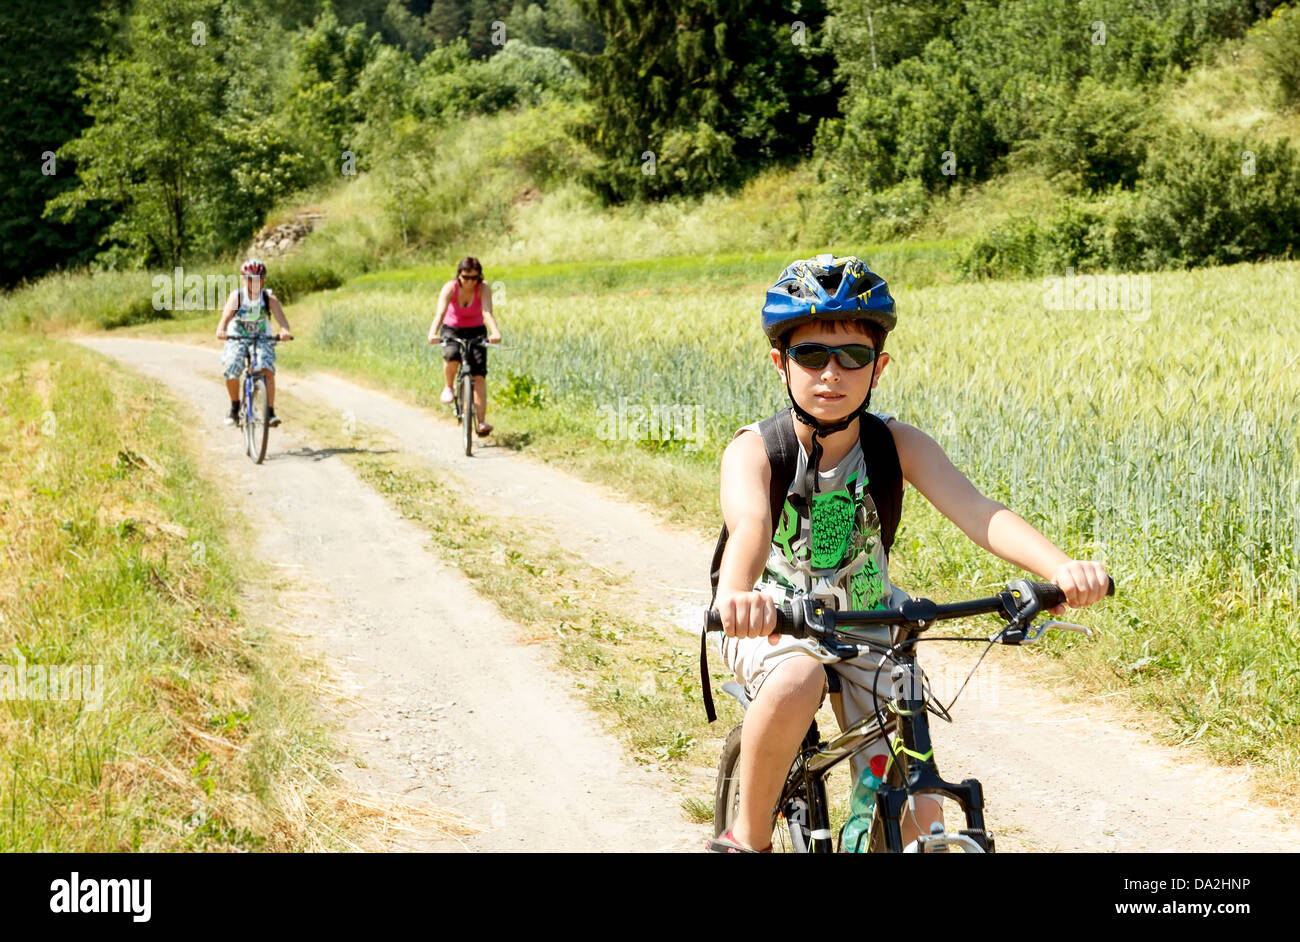 Teenager riding bicycle on trip in sunny day Stock Photo